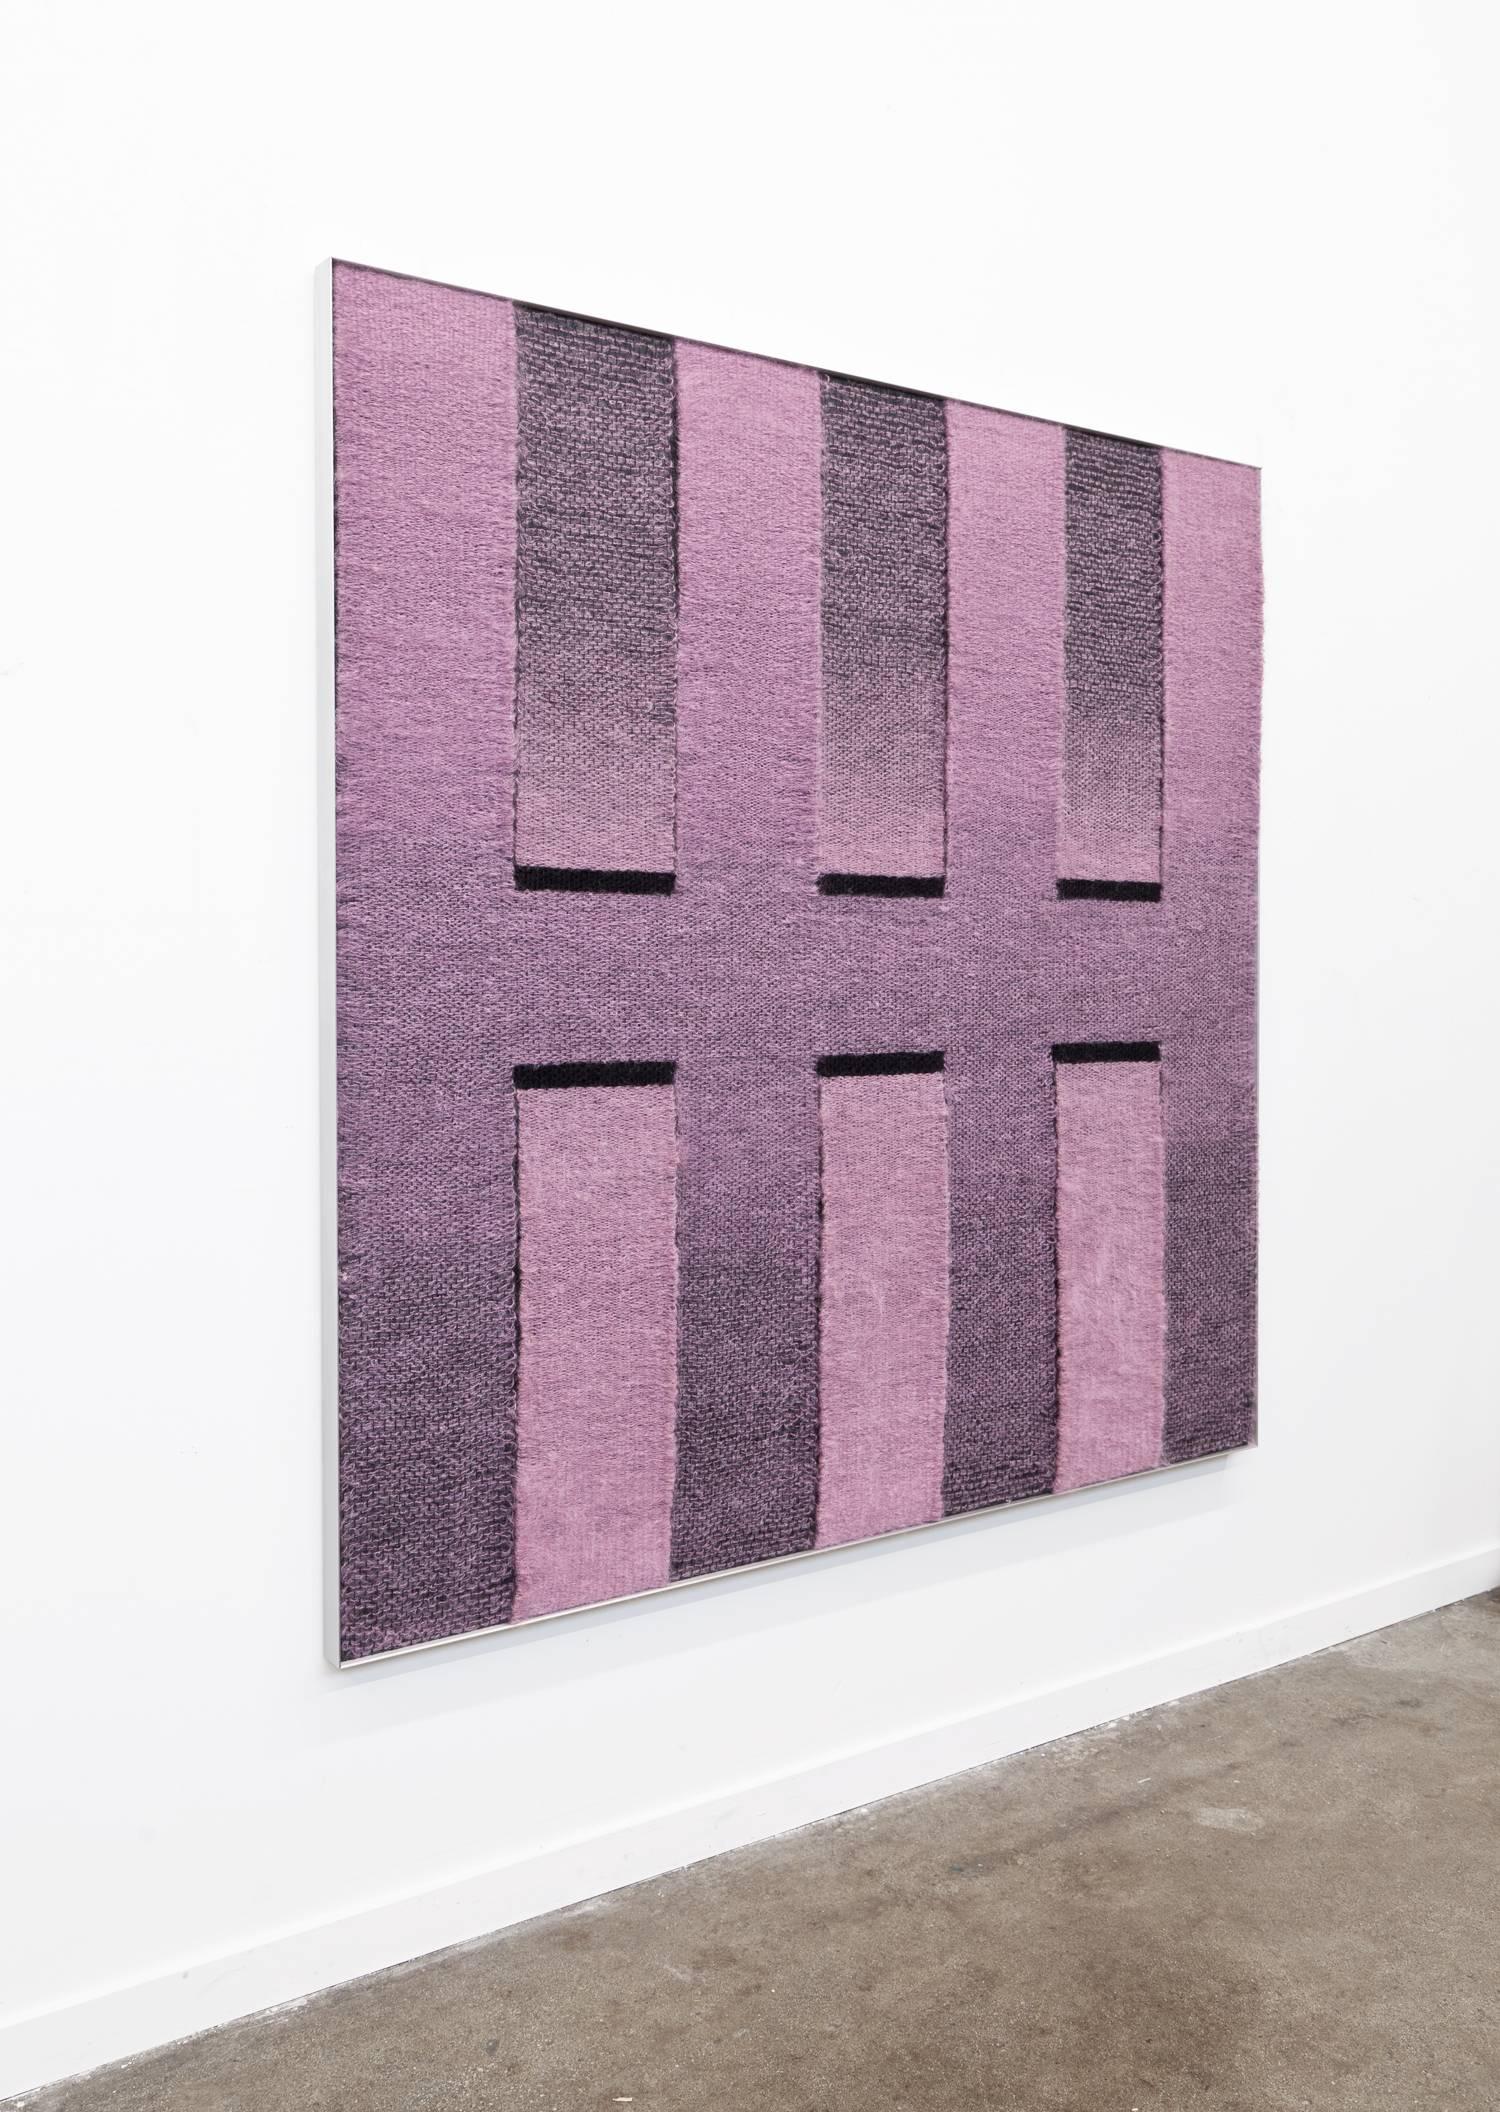 American Contemporary Weaving Textile Fiber Art, Pink to Black Rectangles by Mimi Jung For Sale